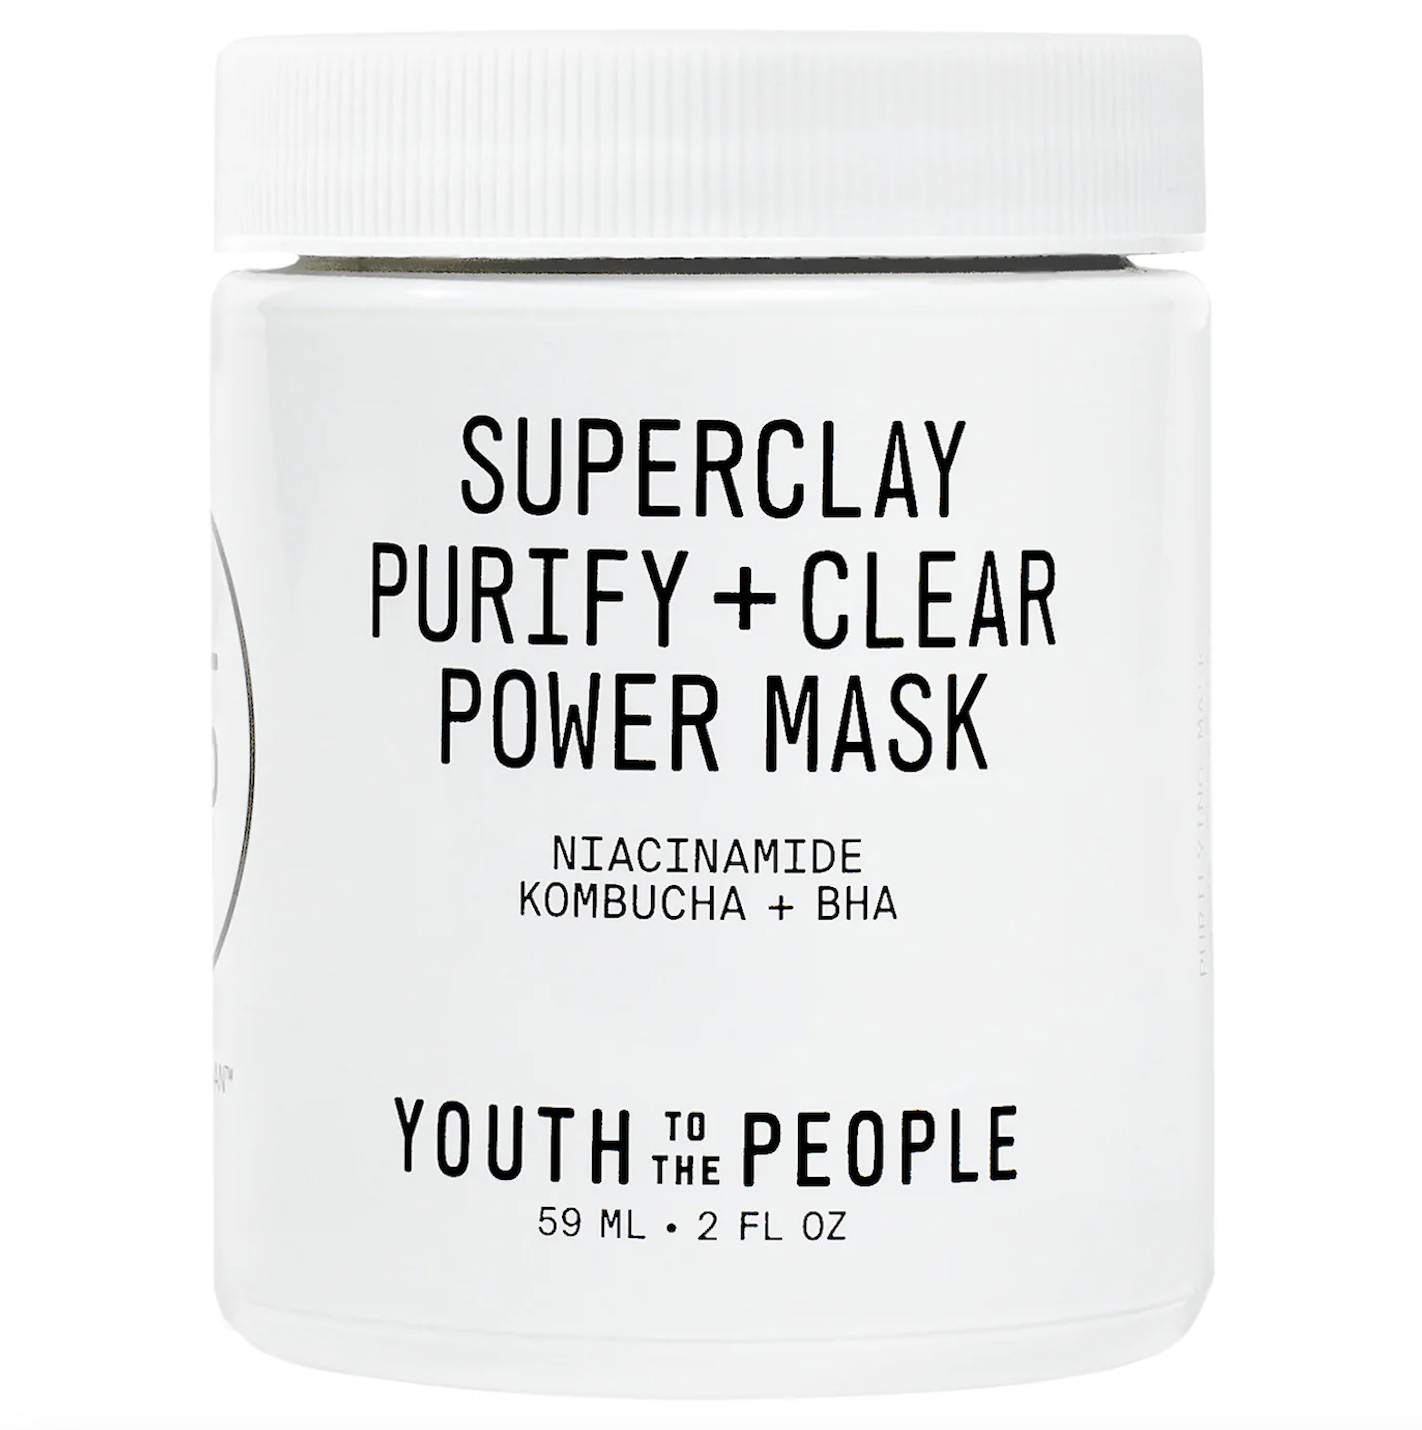 According to Experts, These Are the Very Best Face Masks for Acne-Prone ...